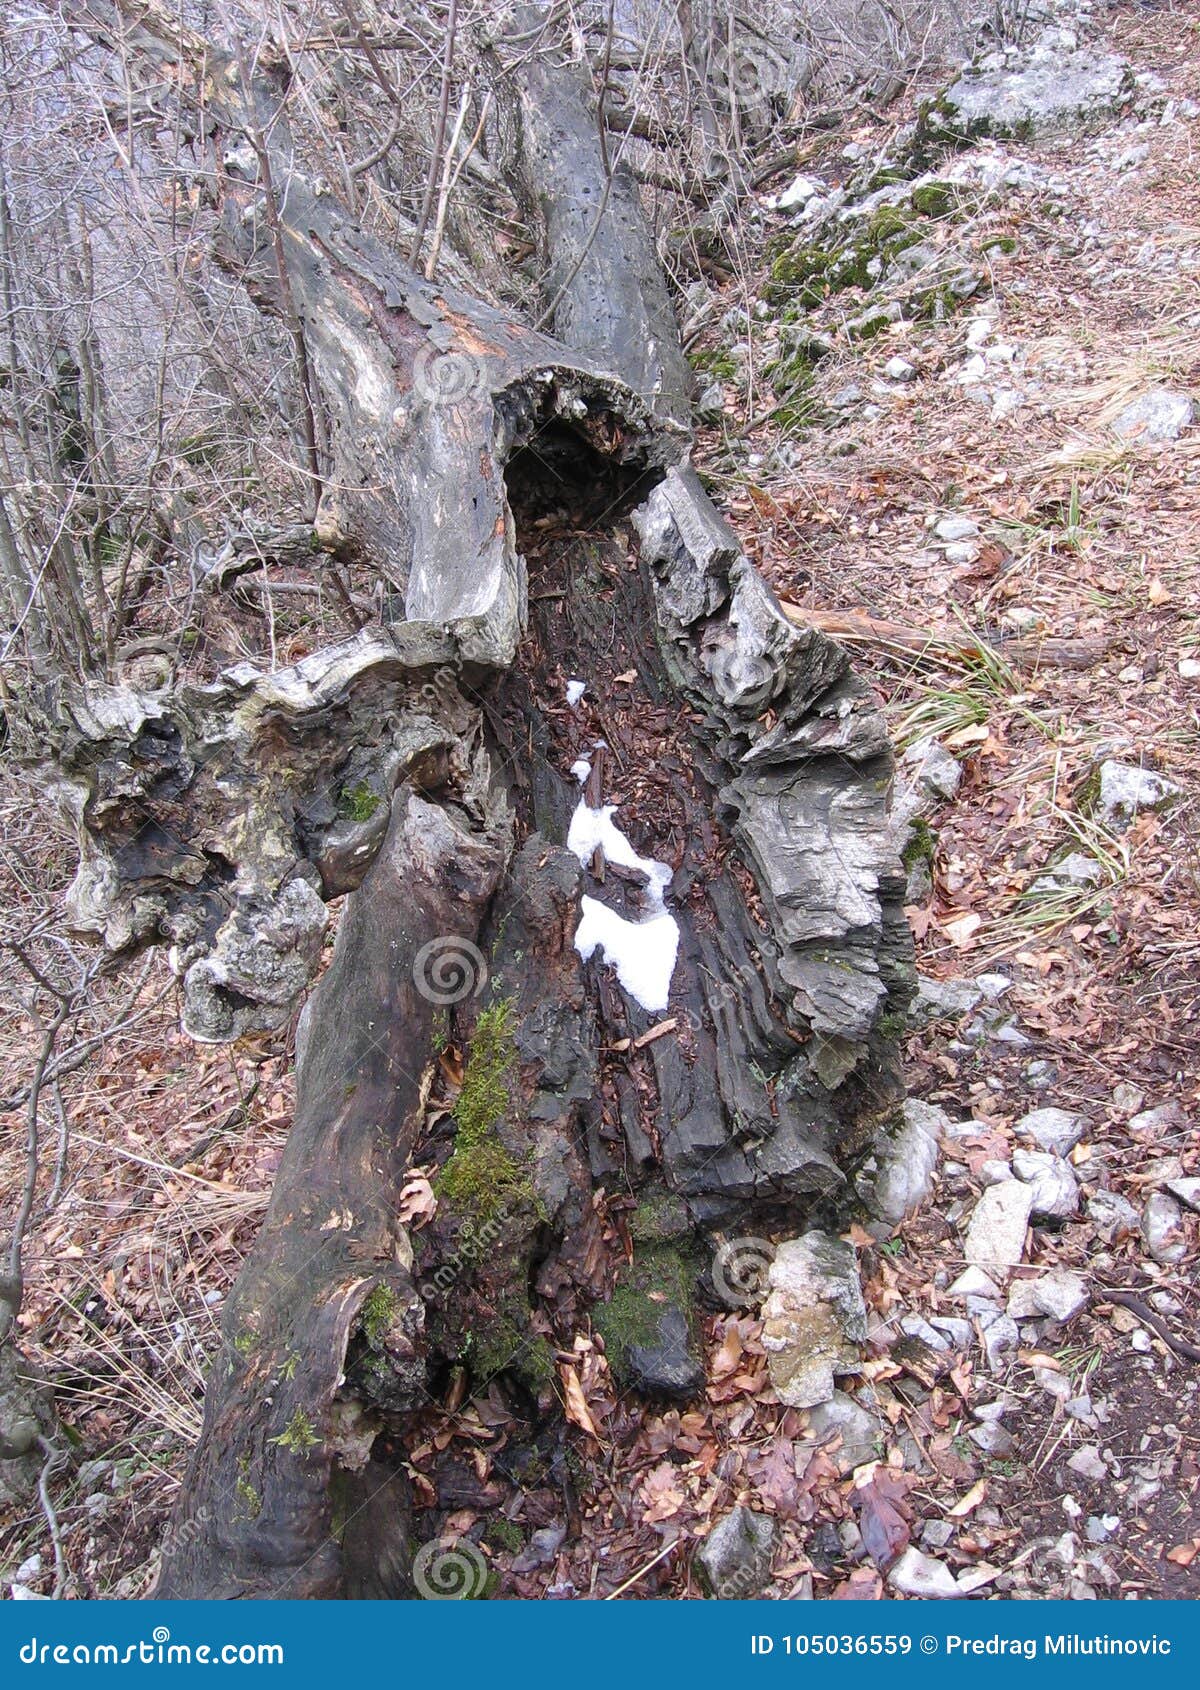 rotten wood in the forest